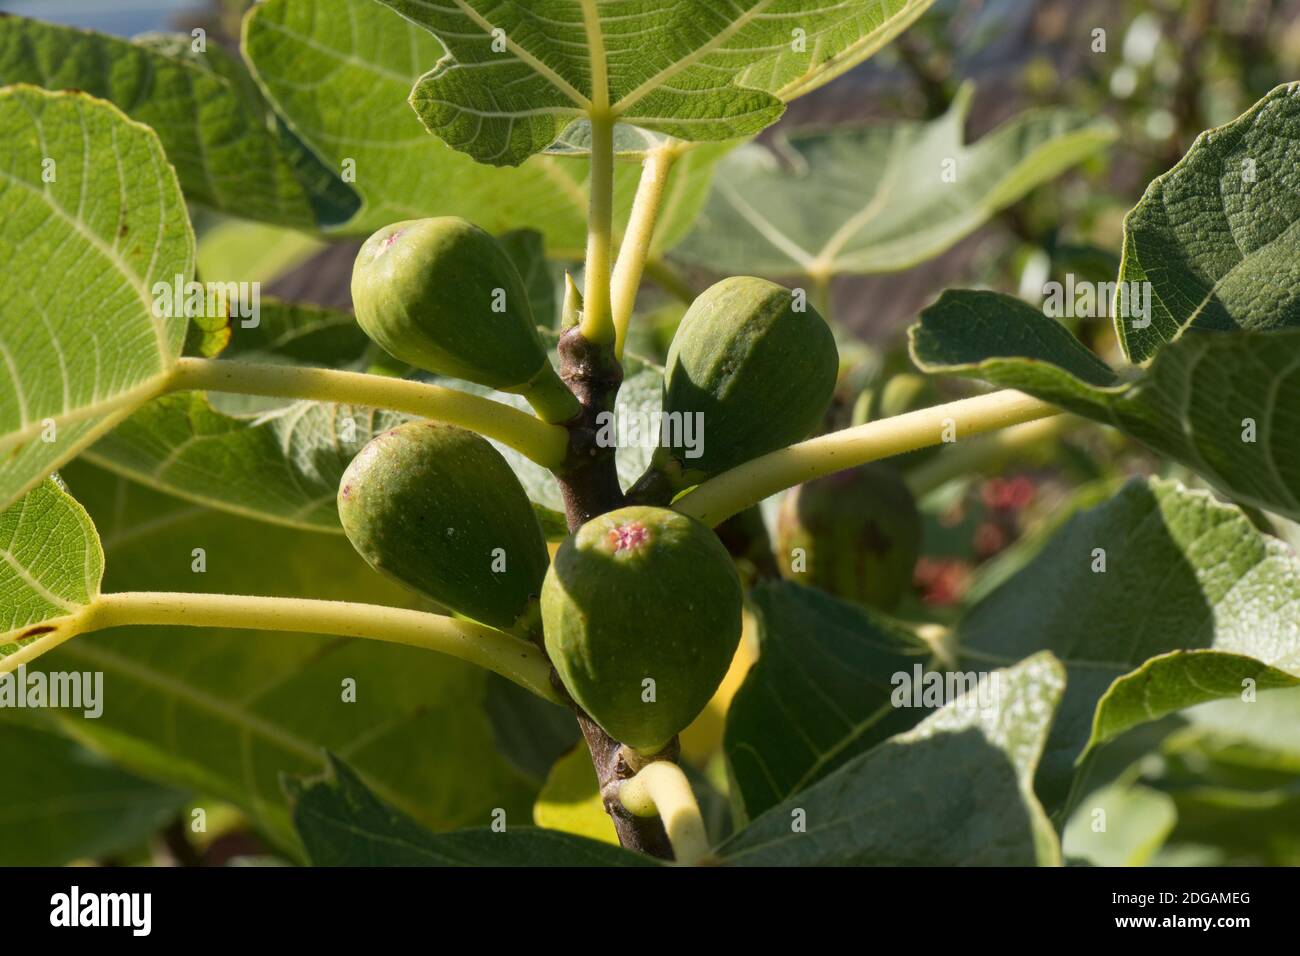 Leaves and green maturing fruit on a common fig (Ficus carica) 'Brown Turkey' tree, Berkshire, September Stock Photo